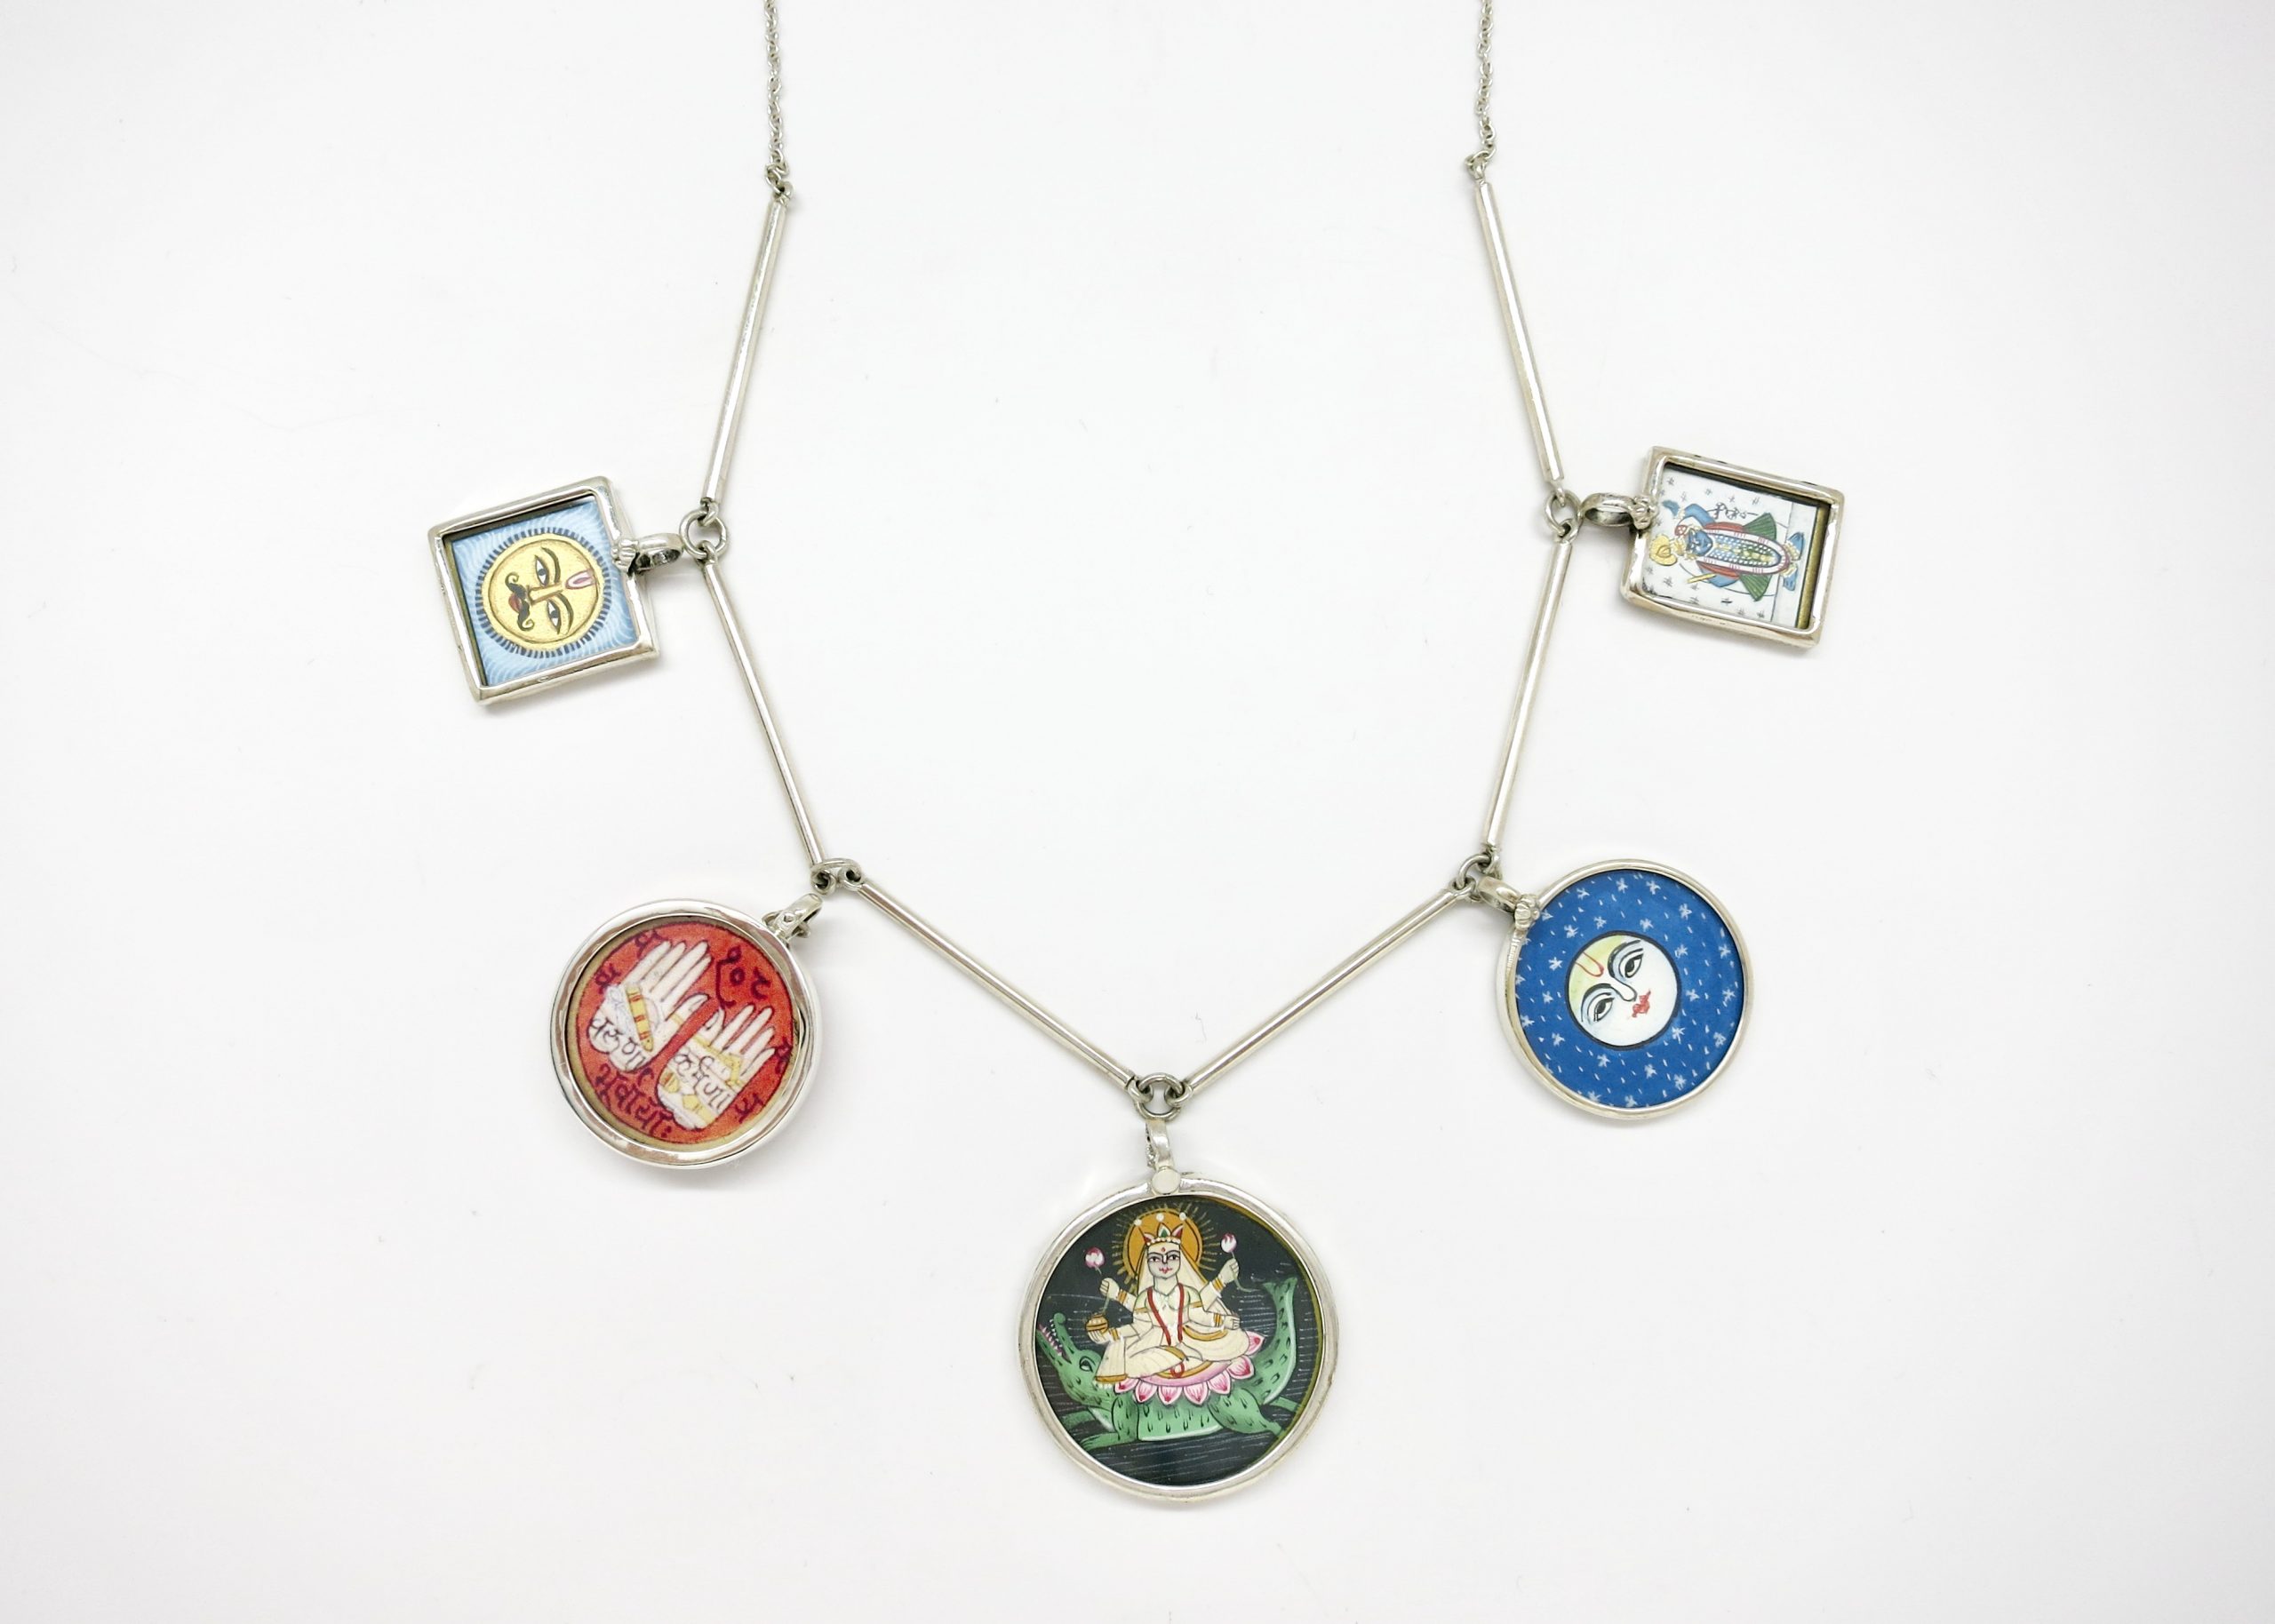 Conversation-starting linked necklace with miniature painting pendants The Miniaturist by Lai